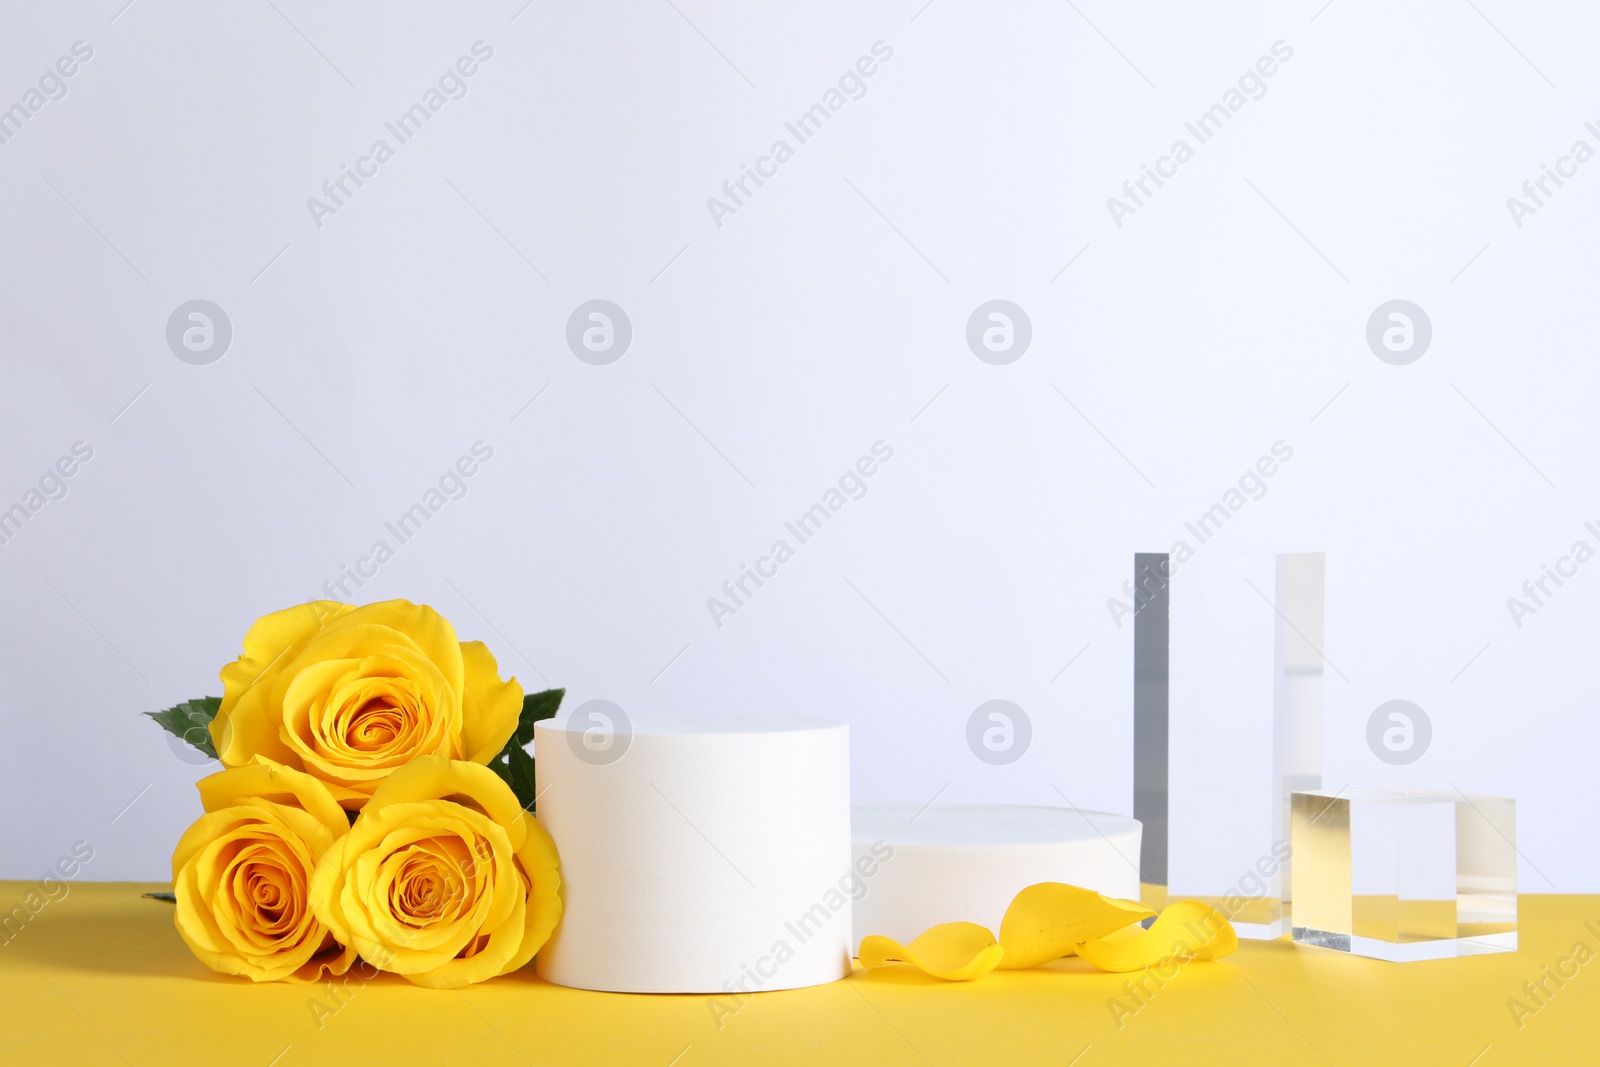 Photo of Beautiful presentation for product. Geometric figures and roses on yellow table against white background, space for text